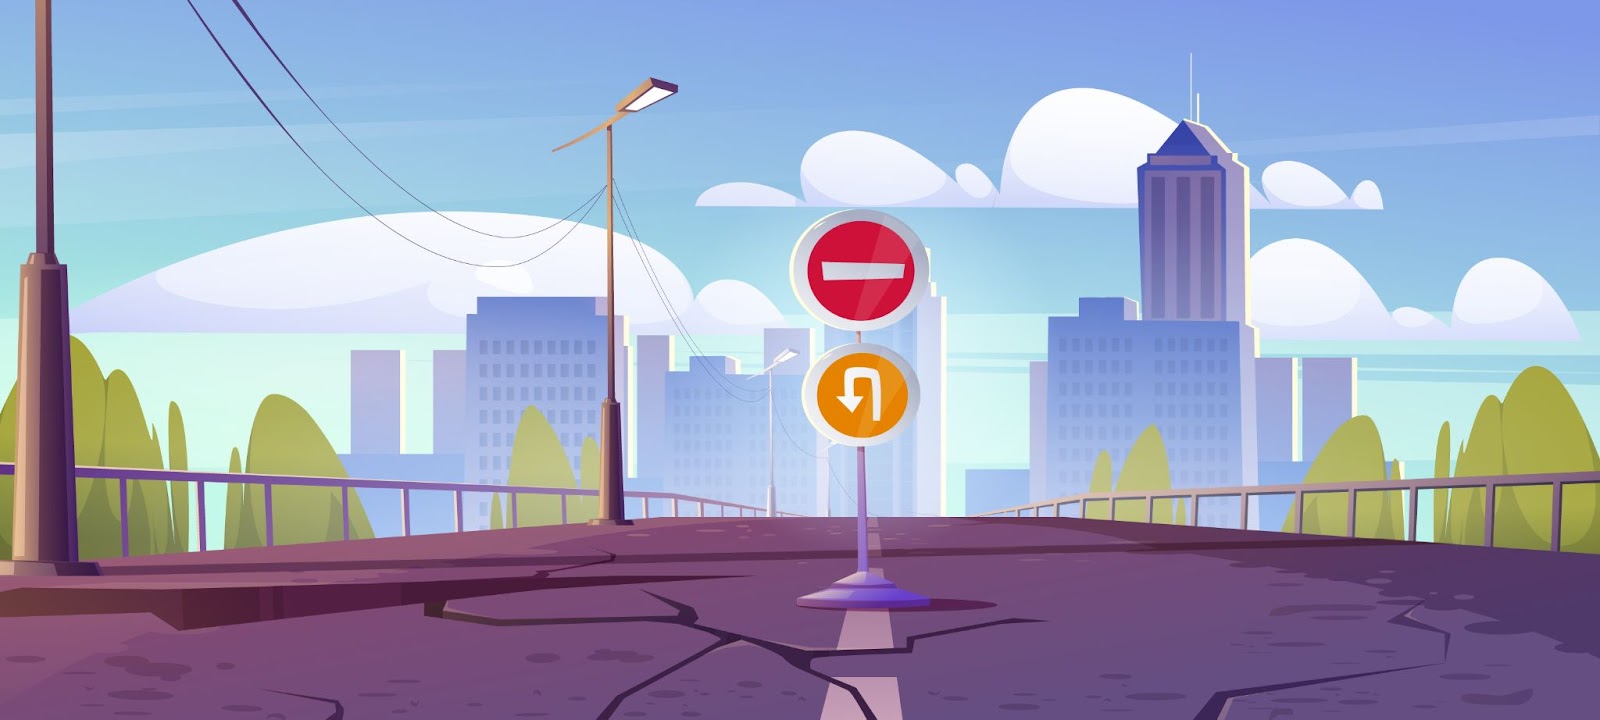 Cartoon of a broken bridge road with do not enter sign and u-turn sign in the middle.  City in the background. 